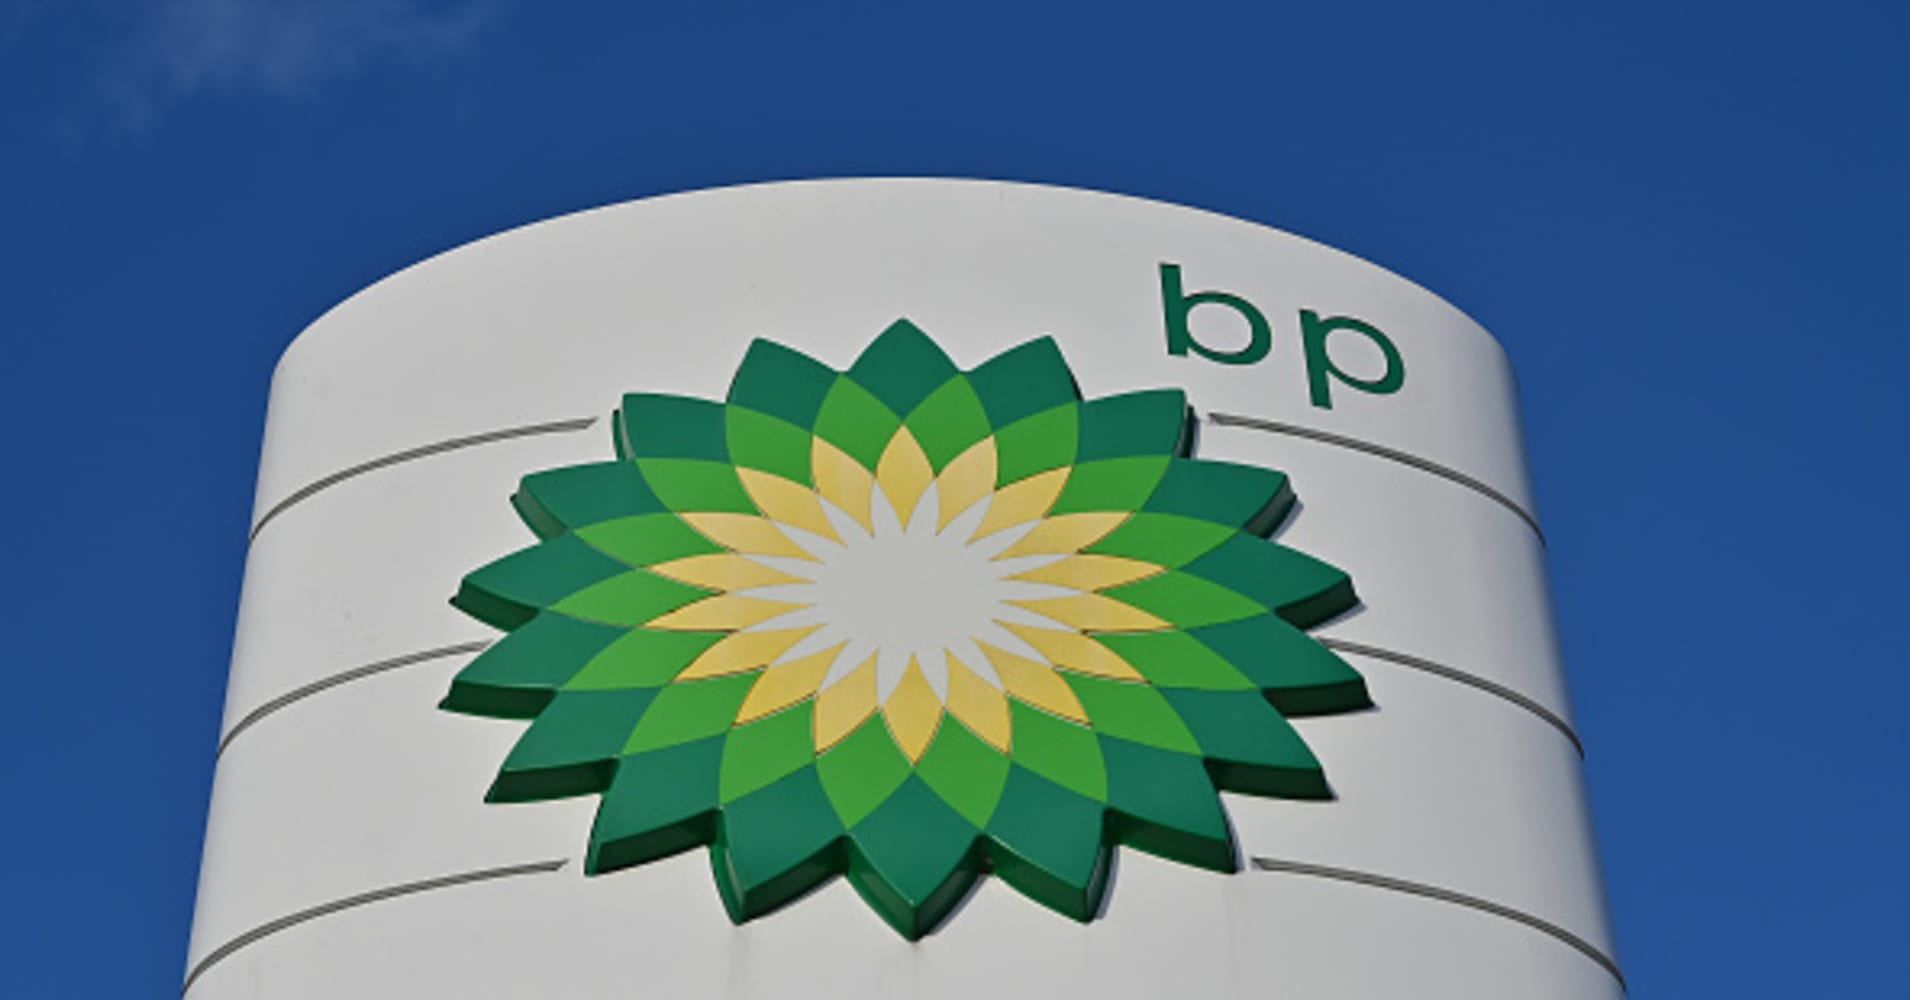 bp exec’s husband guilty of making $1.8 million from insider trading, snooped on her calls